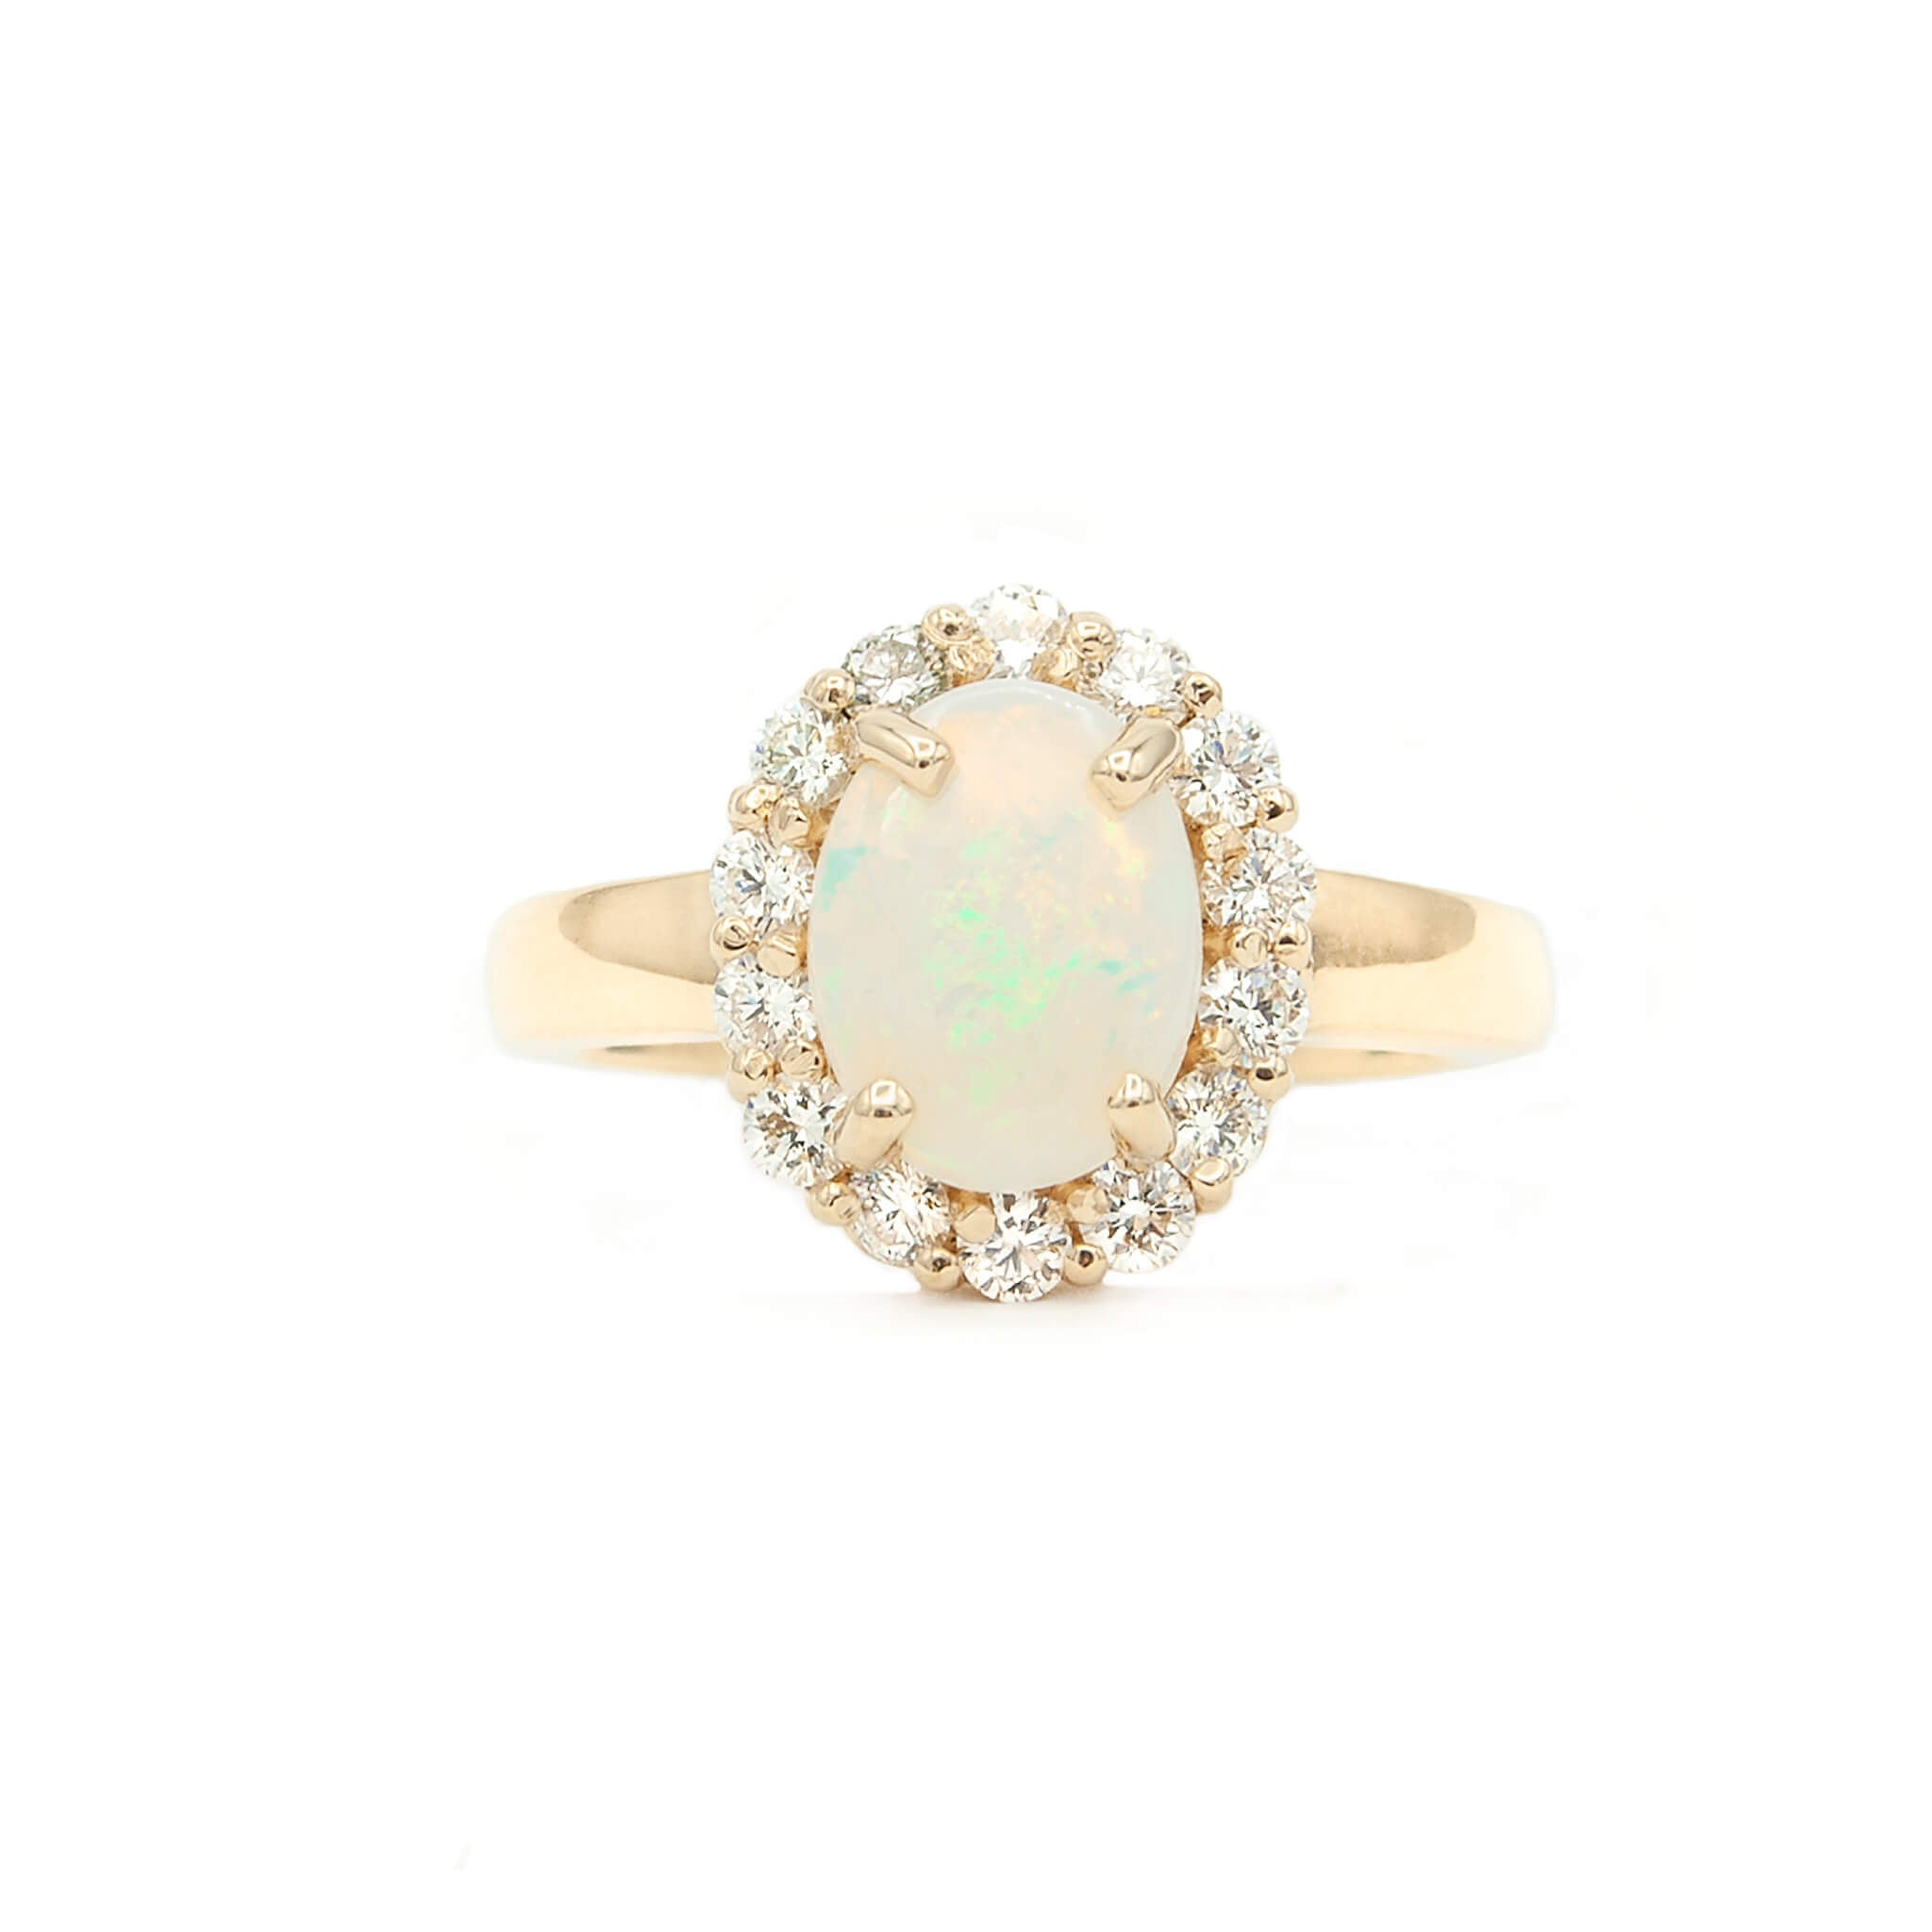 Buy Solitaire Opal Ring Natural Australian Opal Ring 925K Sterling Silver  Handmade 24K Gold Over Opal Silver Jewelry Gift Mothers Day Online in India  - Etsy